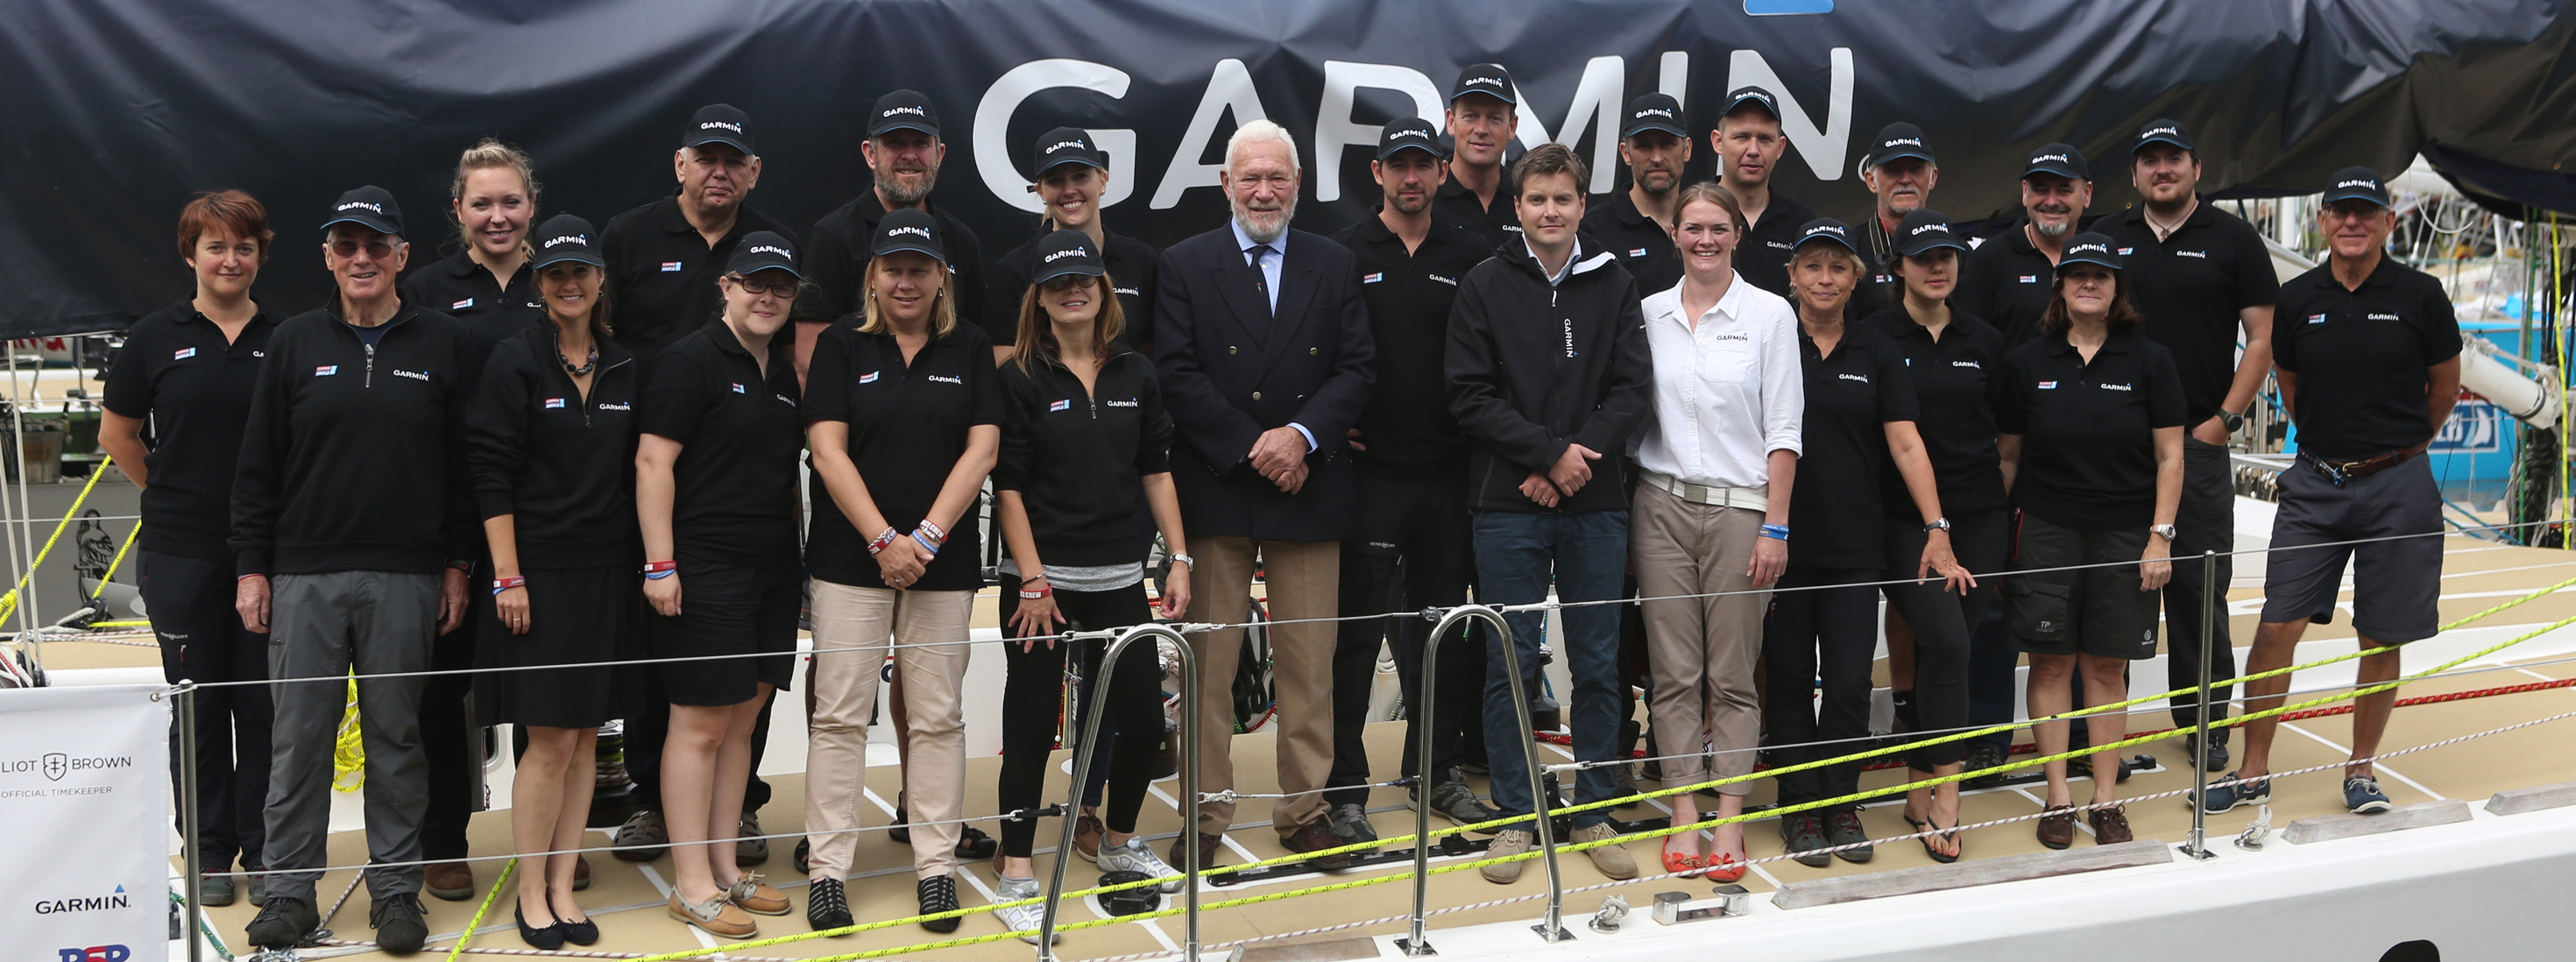 ​Garmin, the global GPS technology company, has named its yacht entry ahead of its start in the Clipper 2015-16 Race.